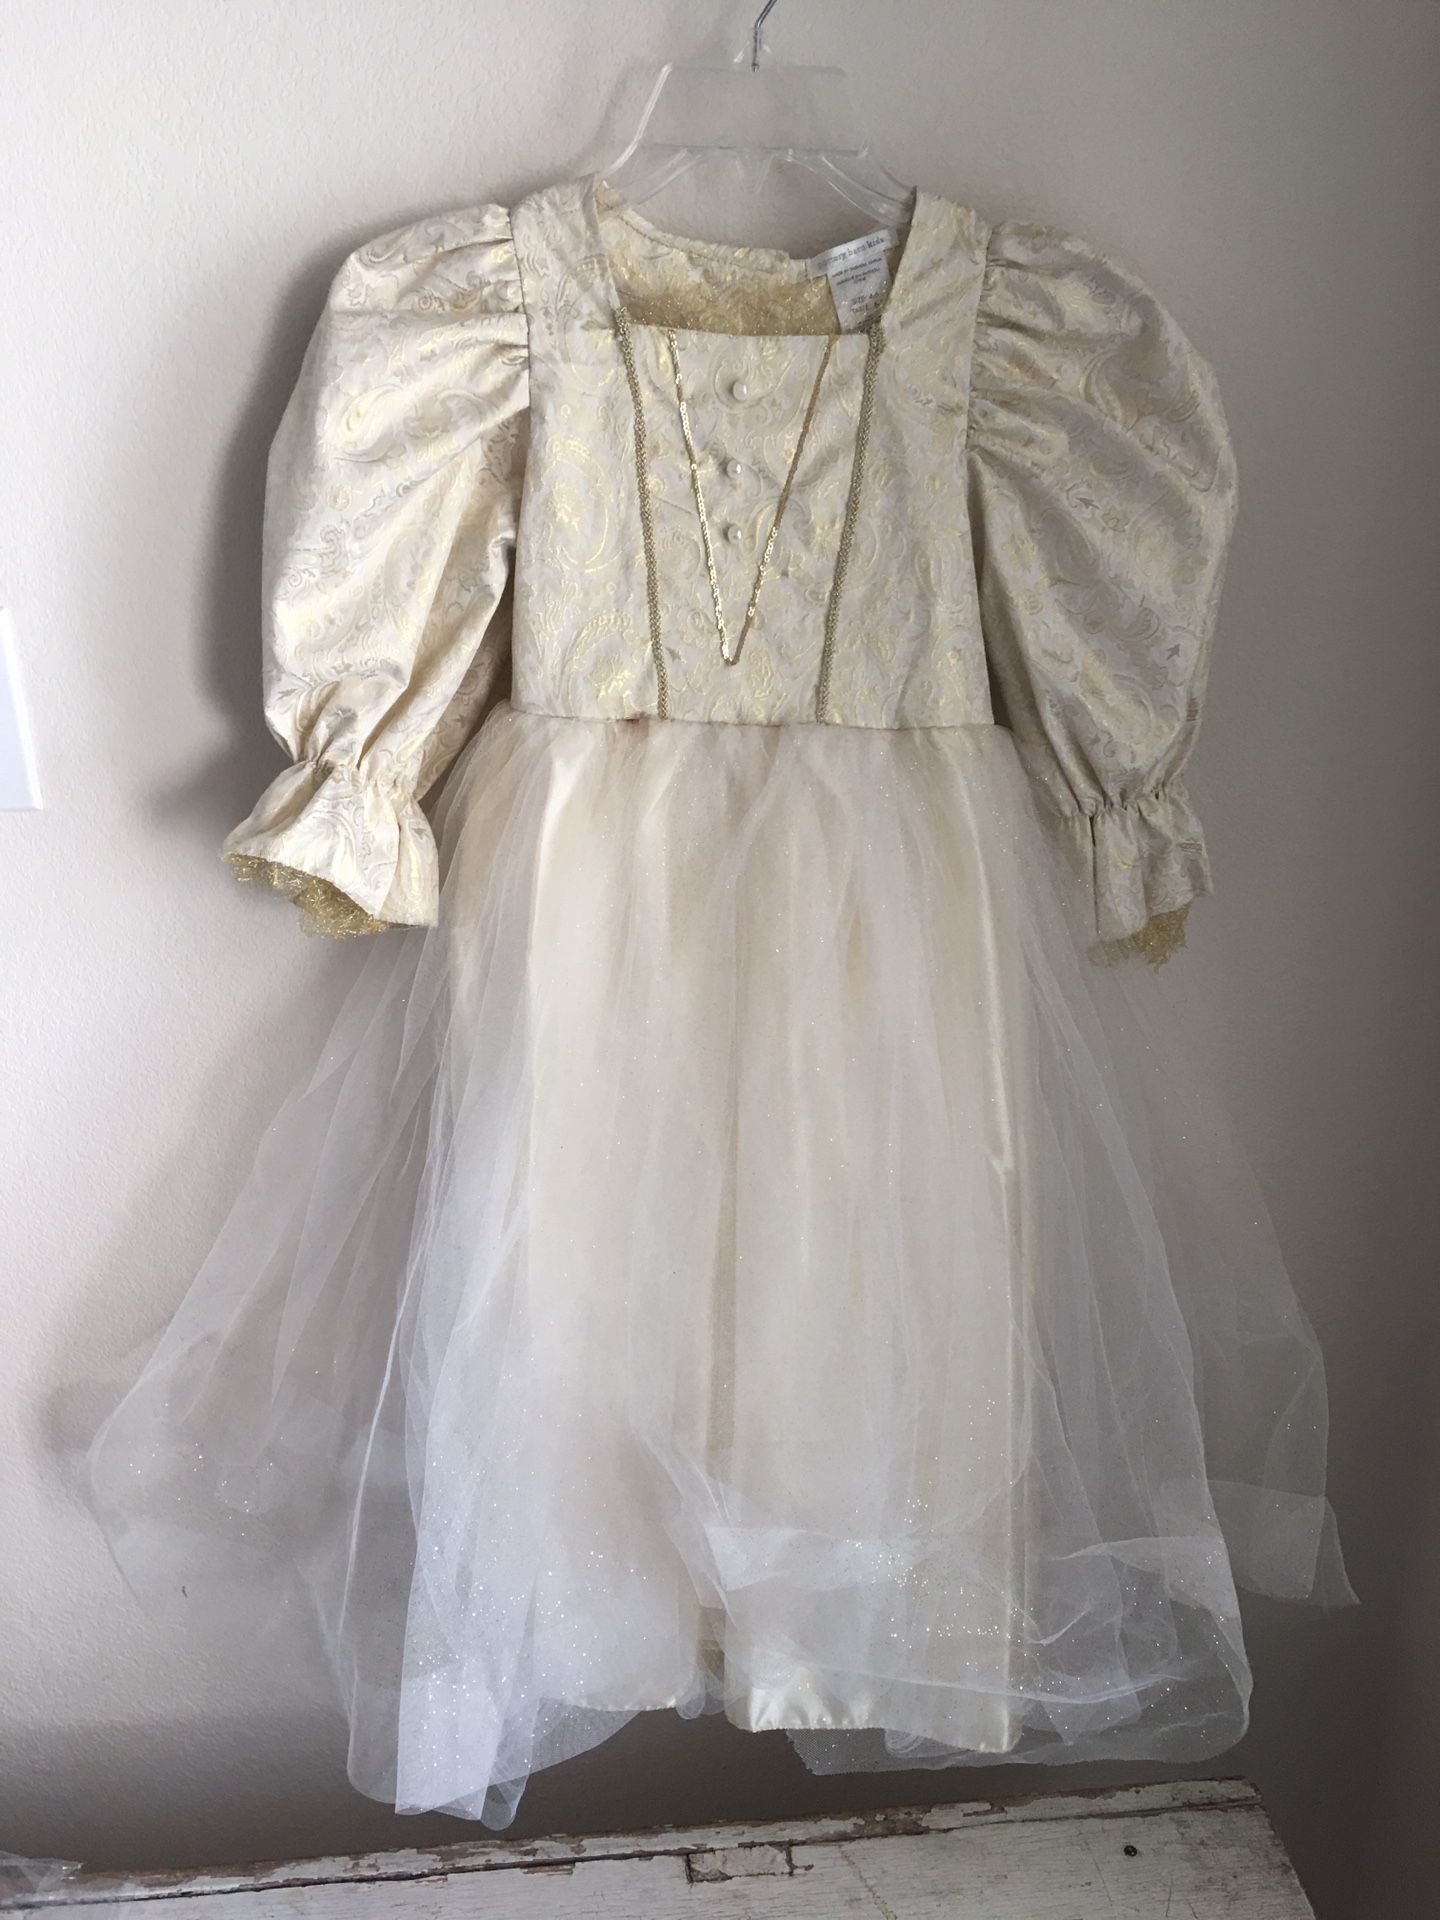 Pottery Barn Kids gold queen/ princess costume